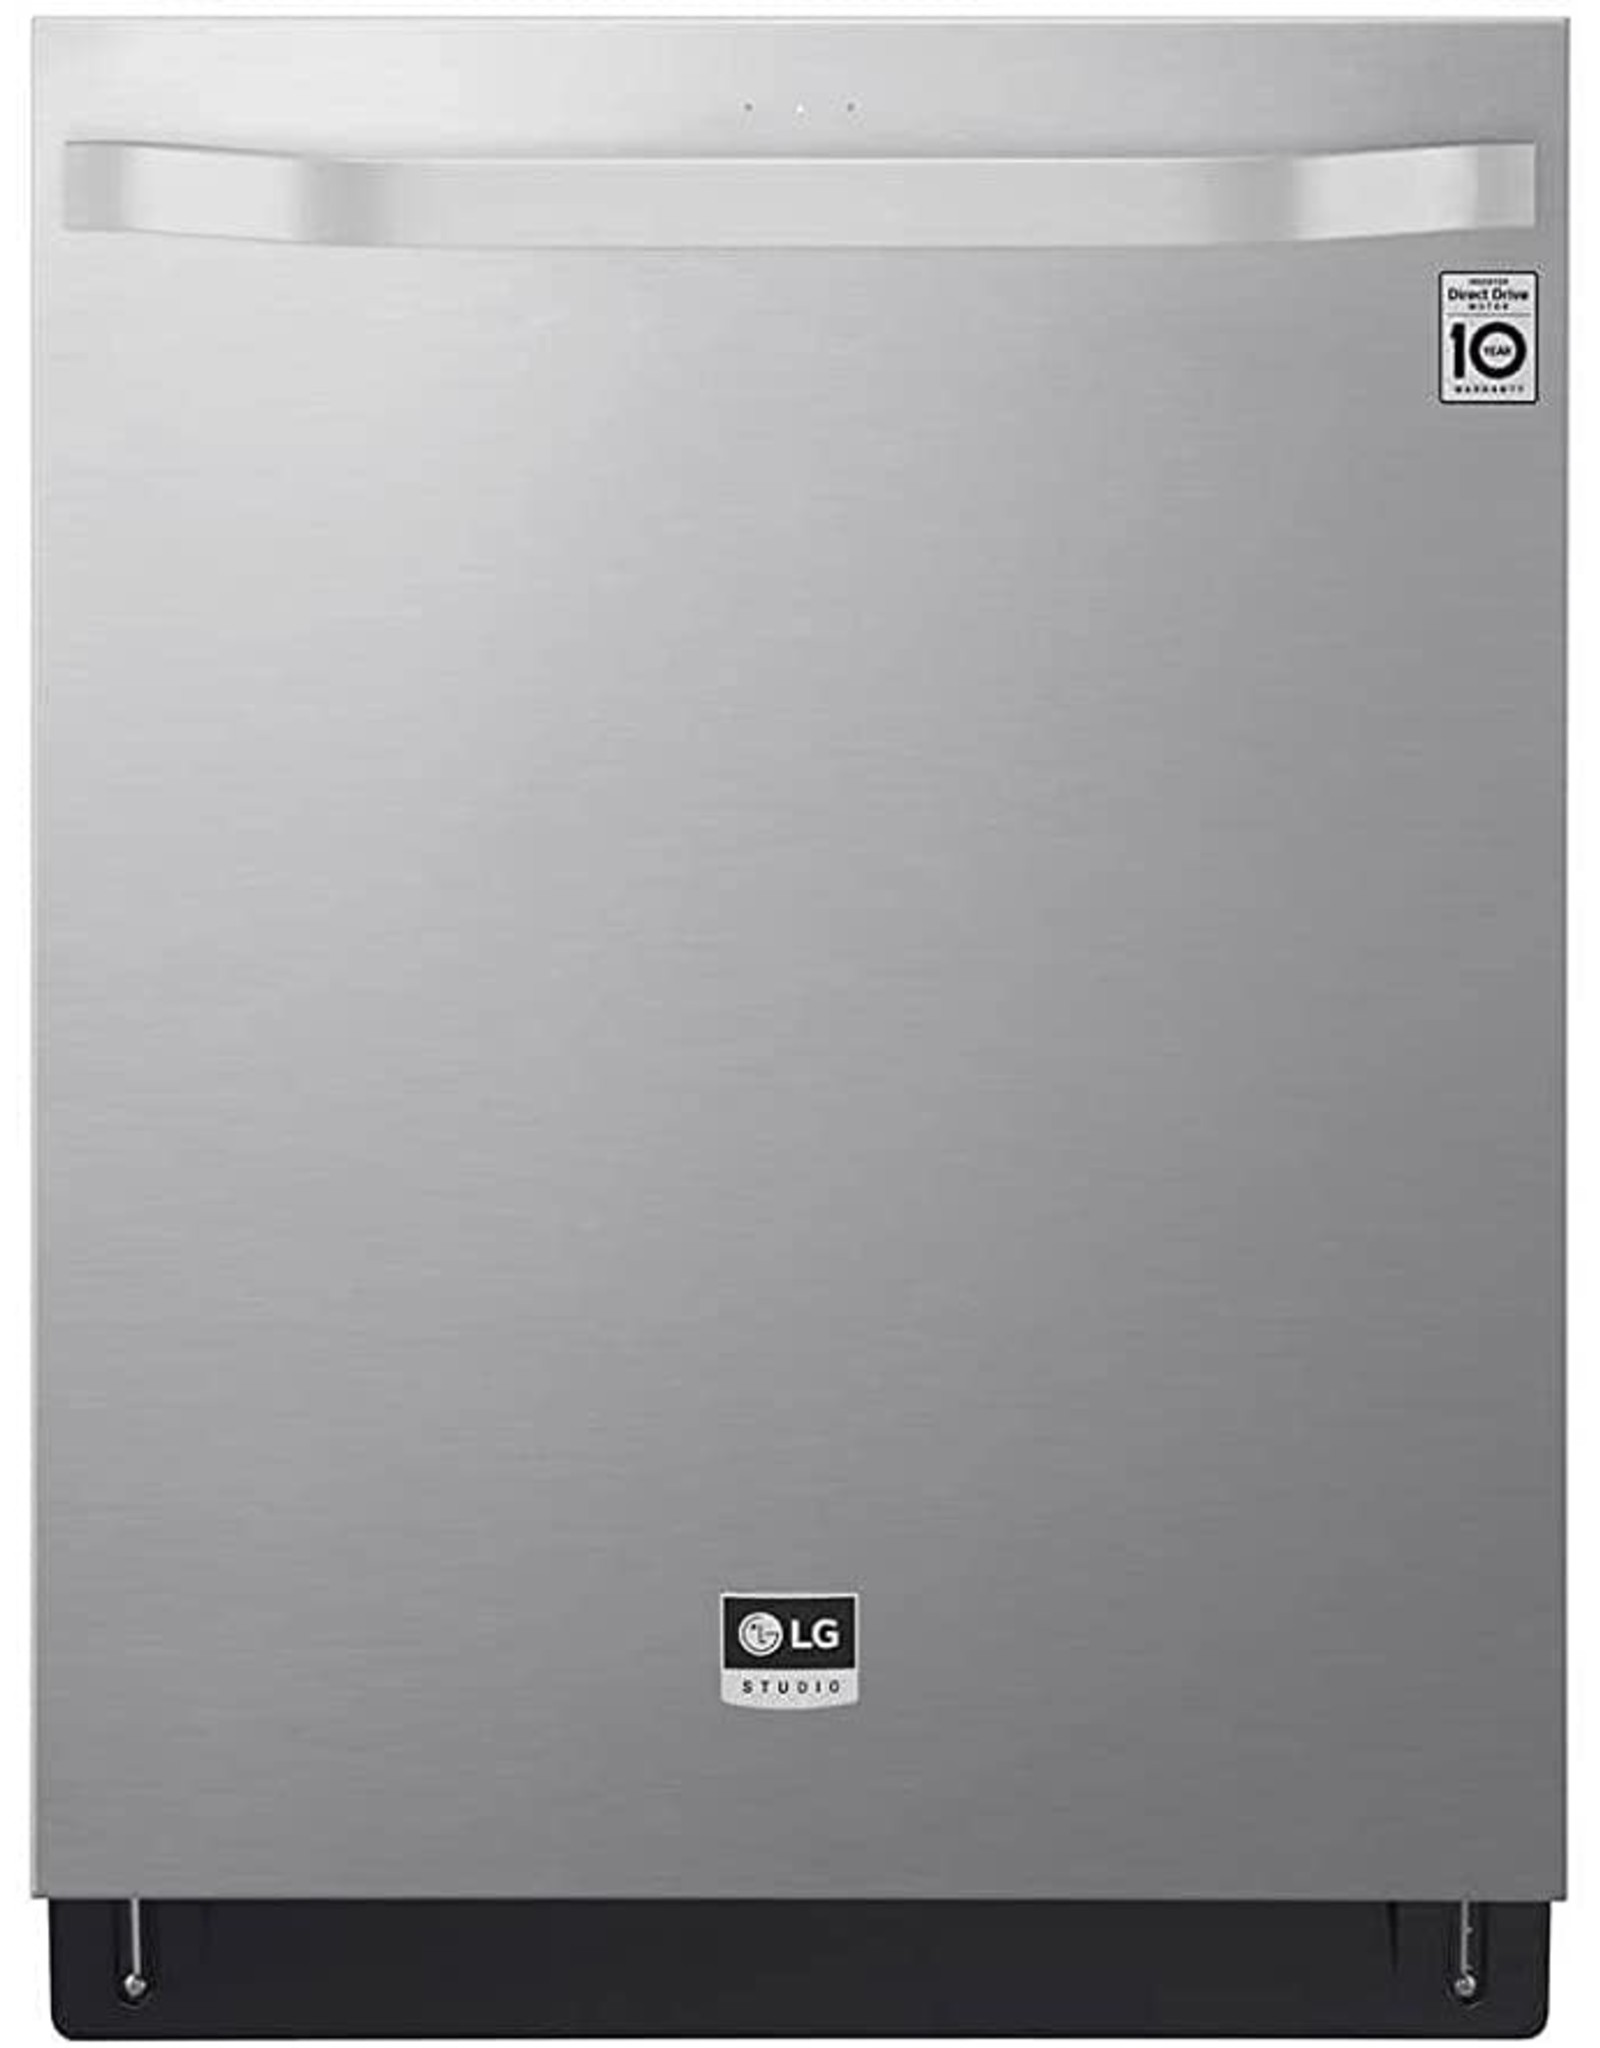 lg LSDT9908SS 24 in. Printproof Stainless Steel Top Control Built-In Dishwasher with Stainless Steel Tub, QuadWash, TrueSteam, 40 dBA